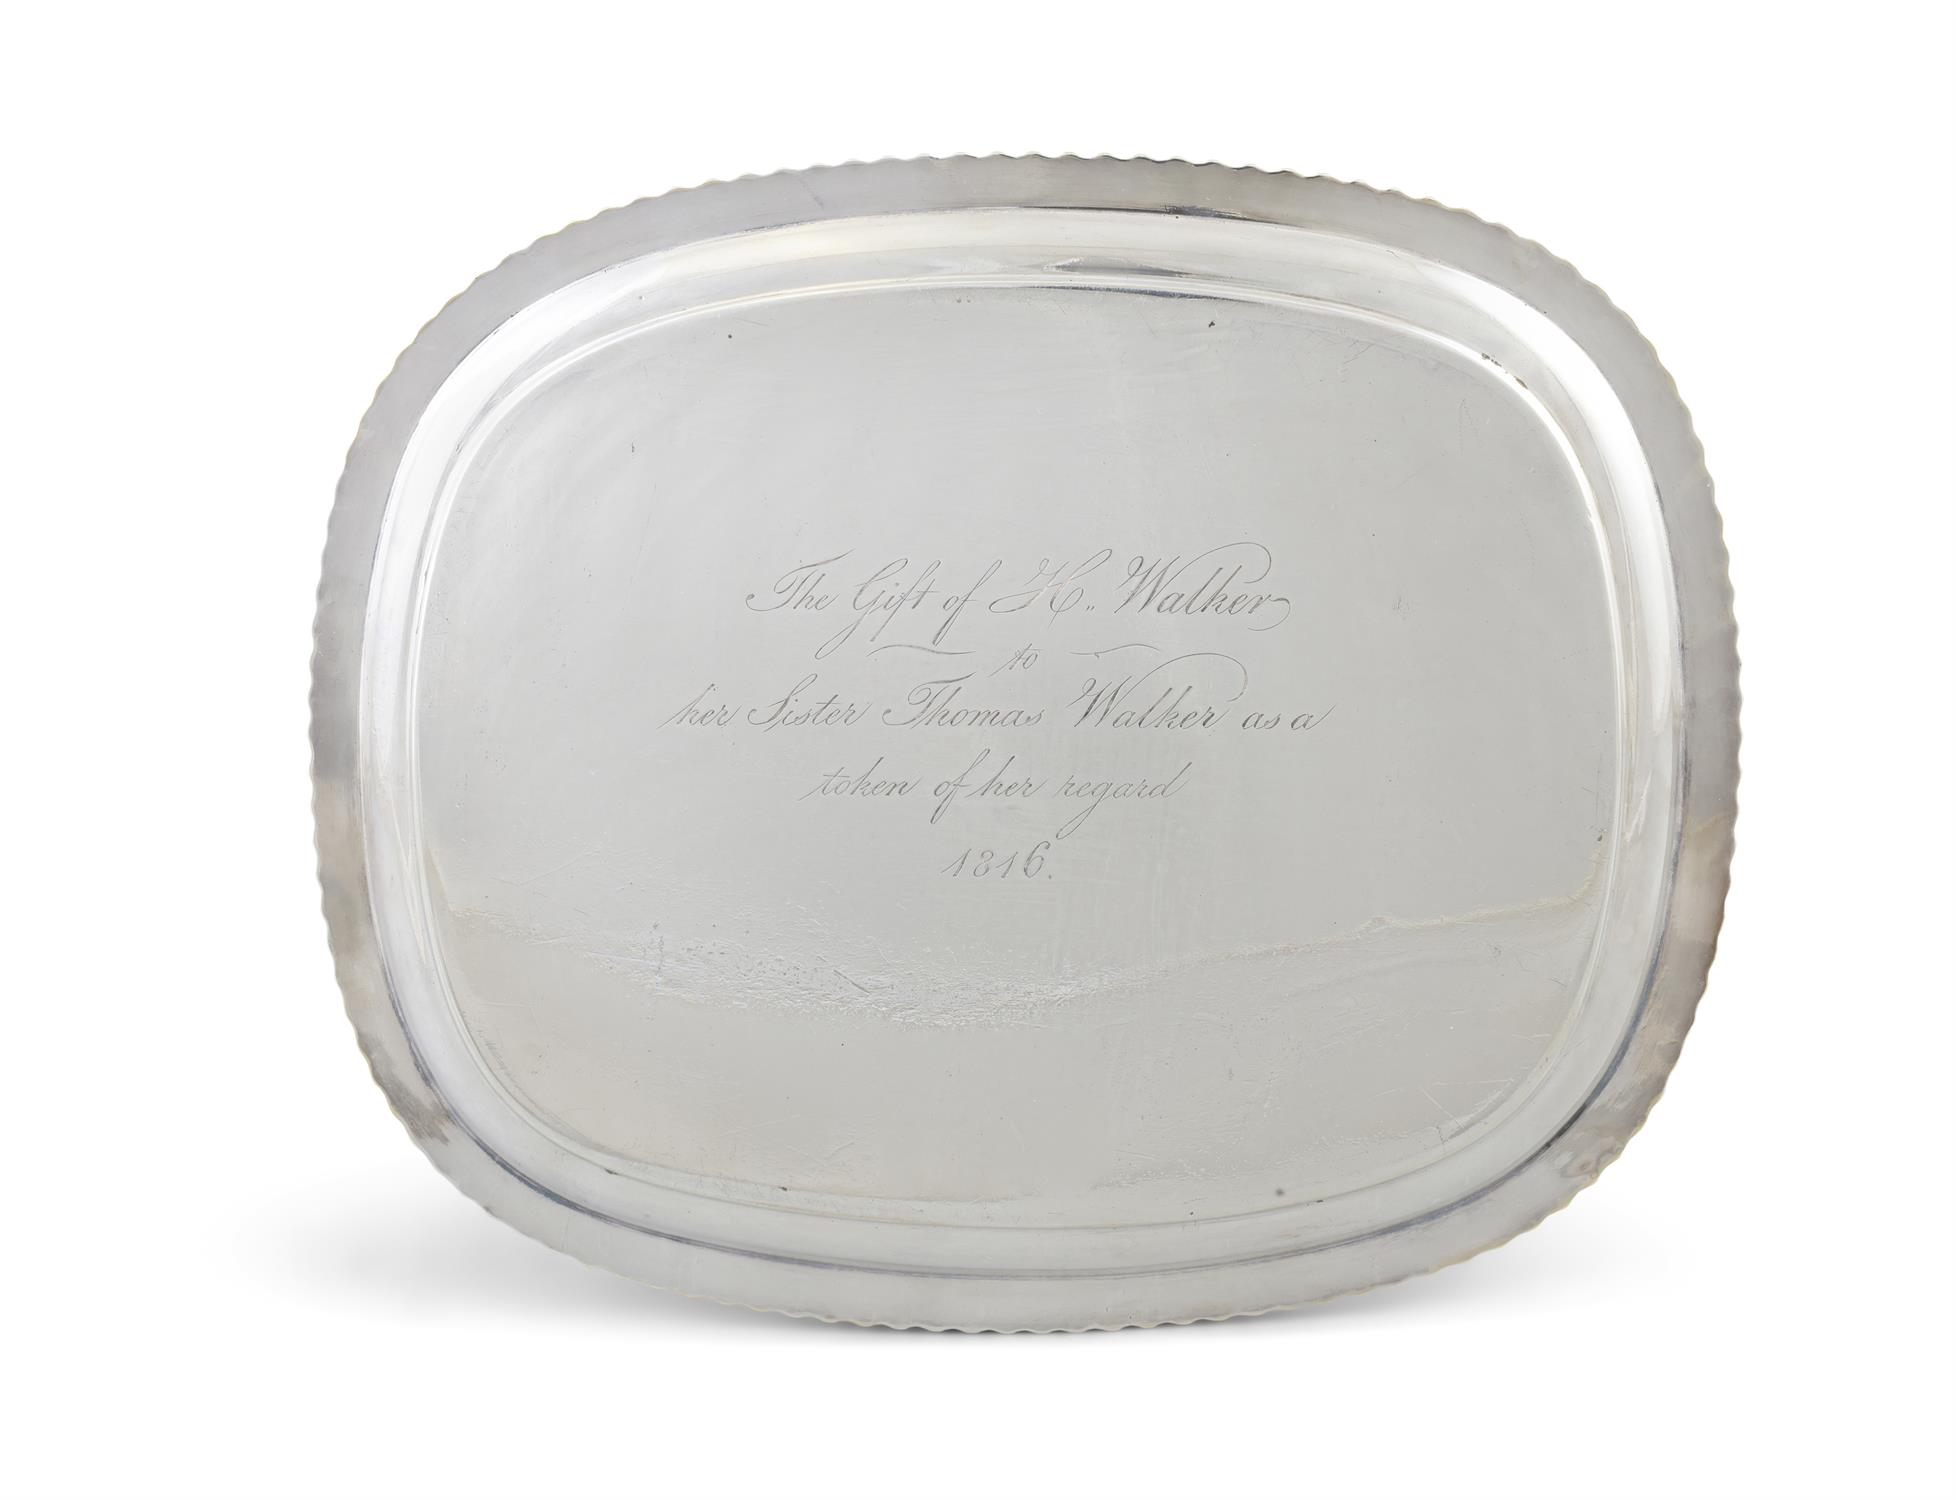 A GEORGE III SILVER CARD TRAY, Sheffield, c.1816, mark probably of John Watson & Son, - Image 2 of 2